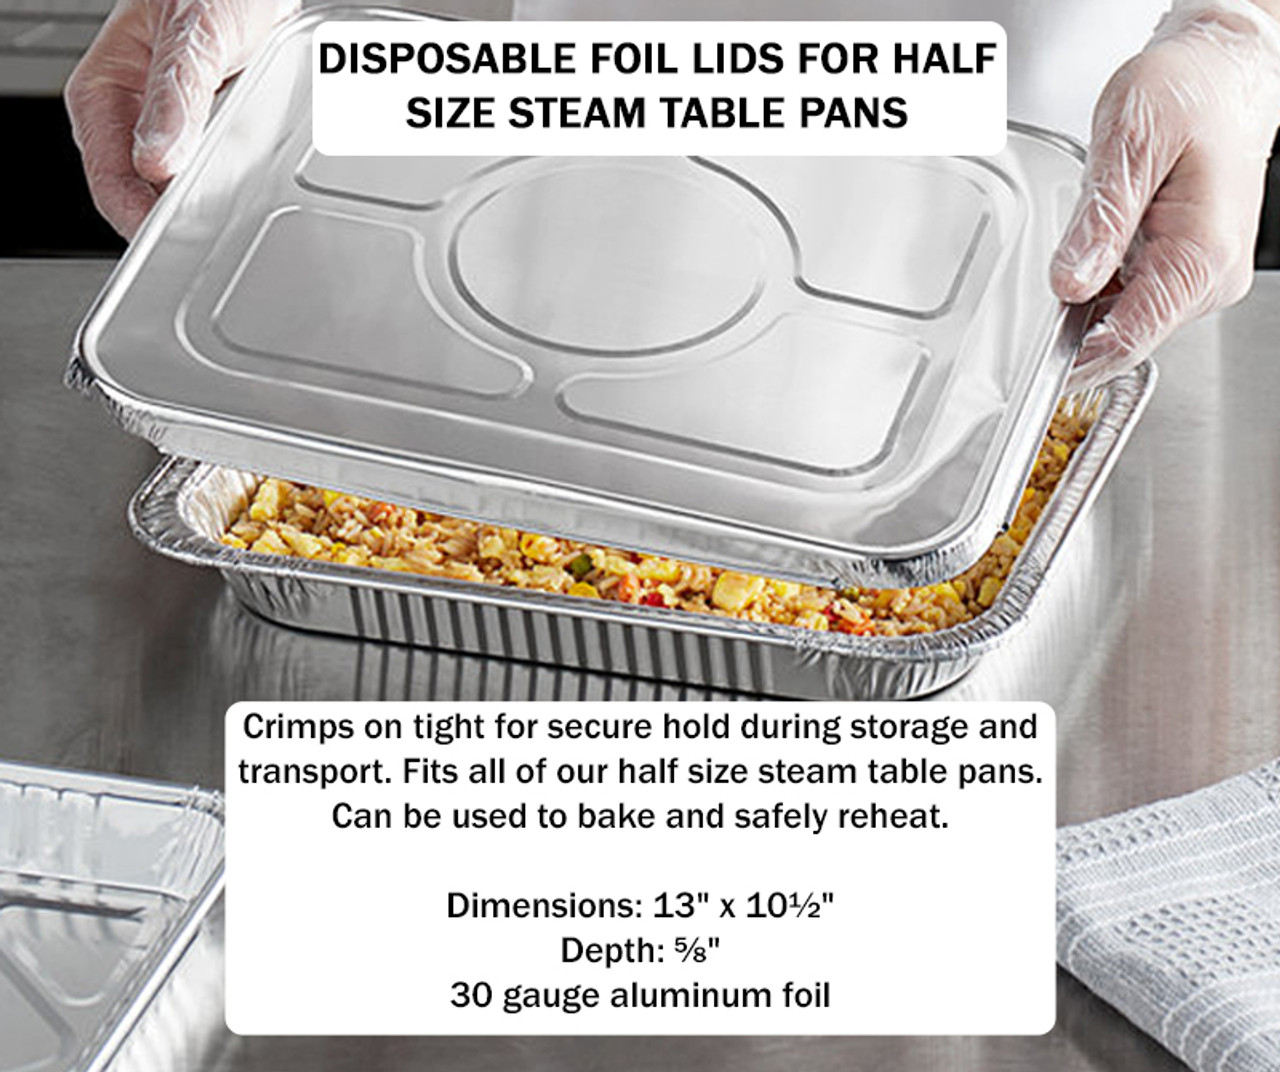 Disposable Foil Lids for Half Size Steam Table Pan - Case of 100 - #8200